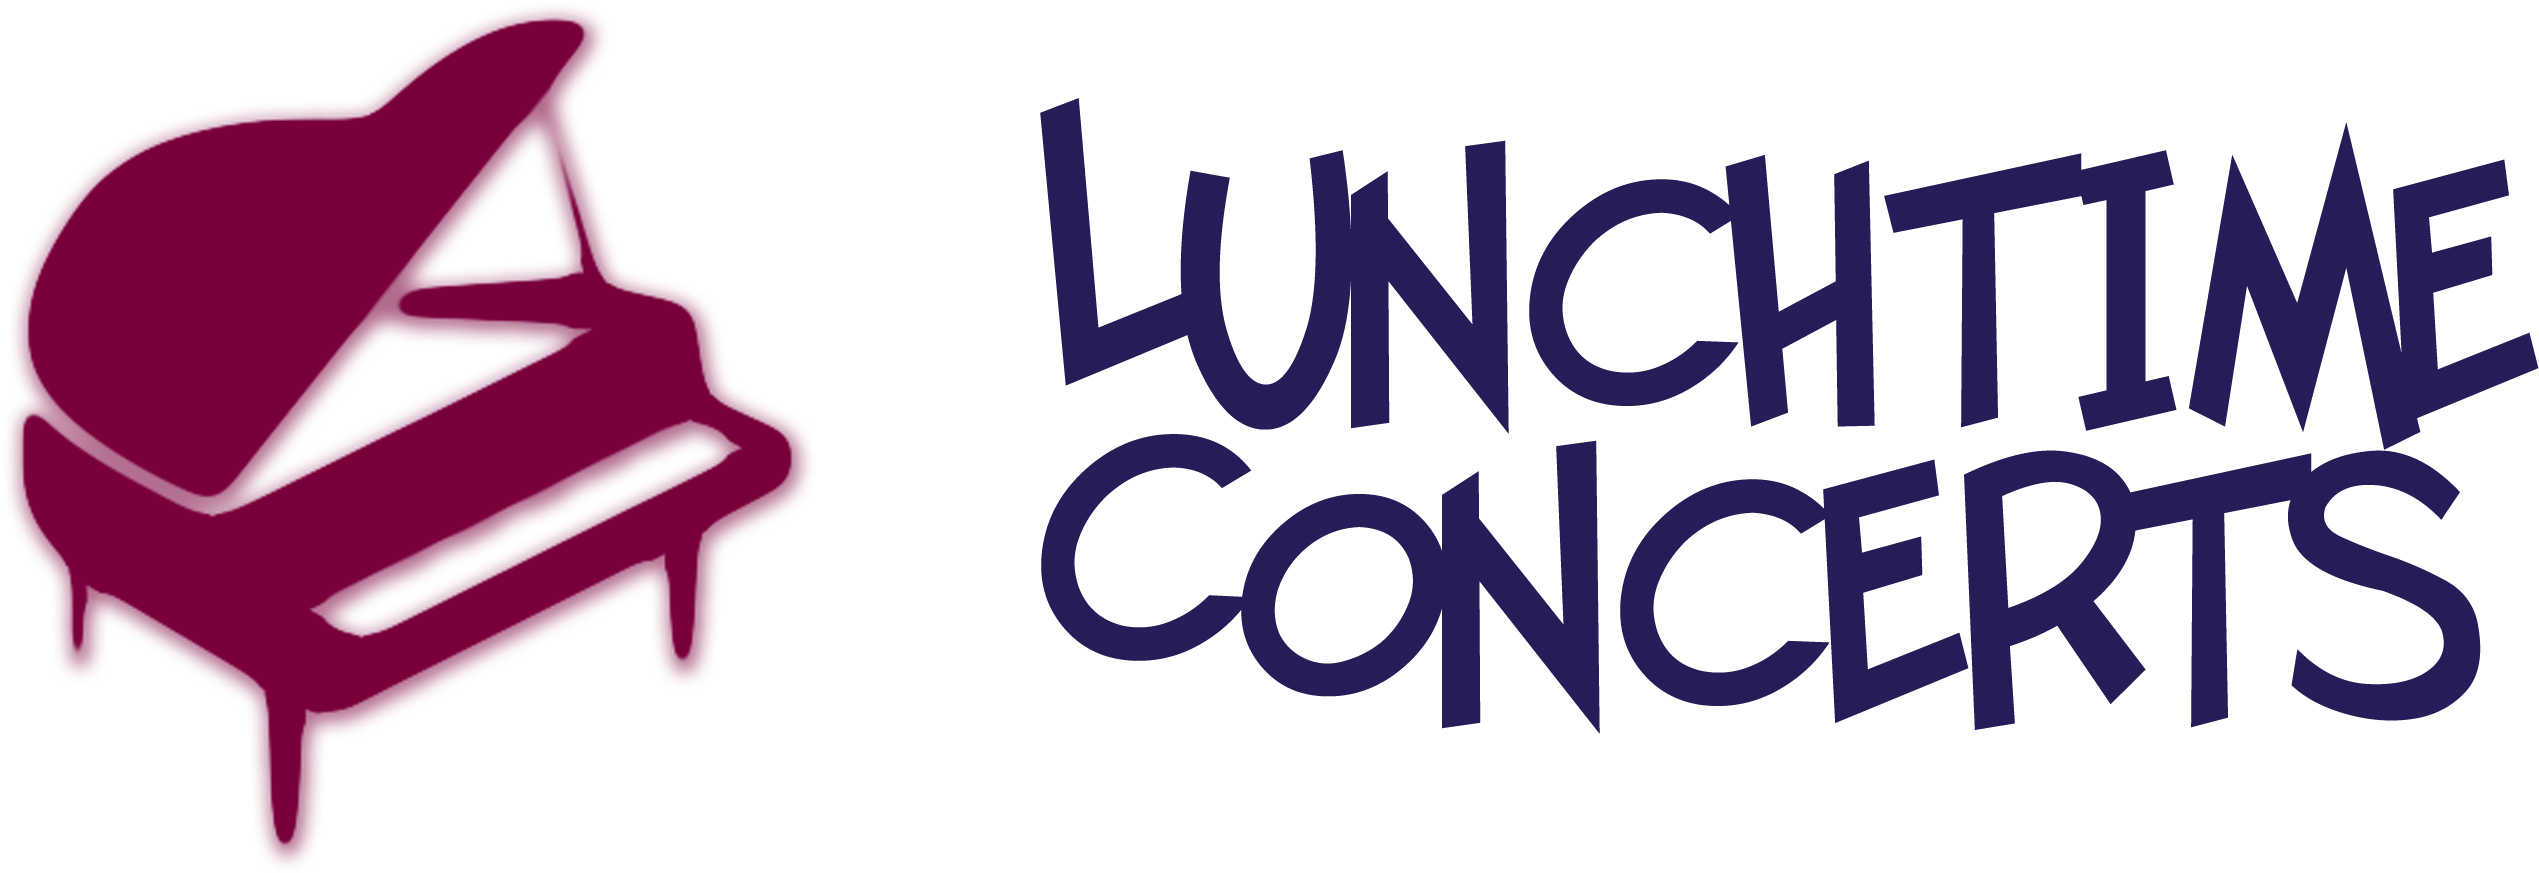 Lunchtime Concerts Icon - Concert (3006x1308)